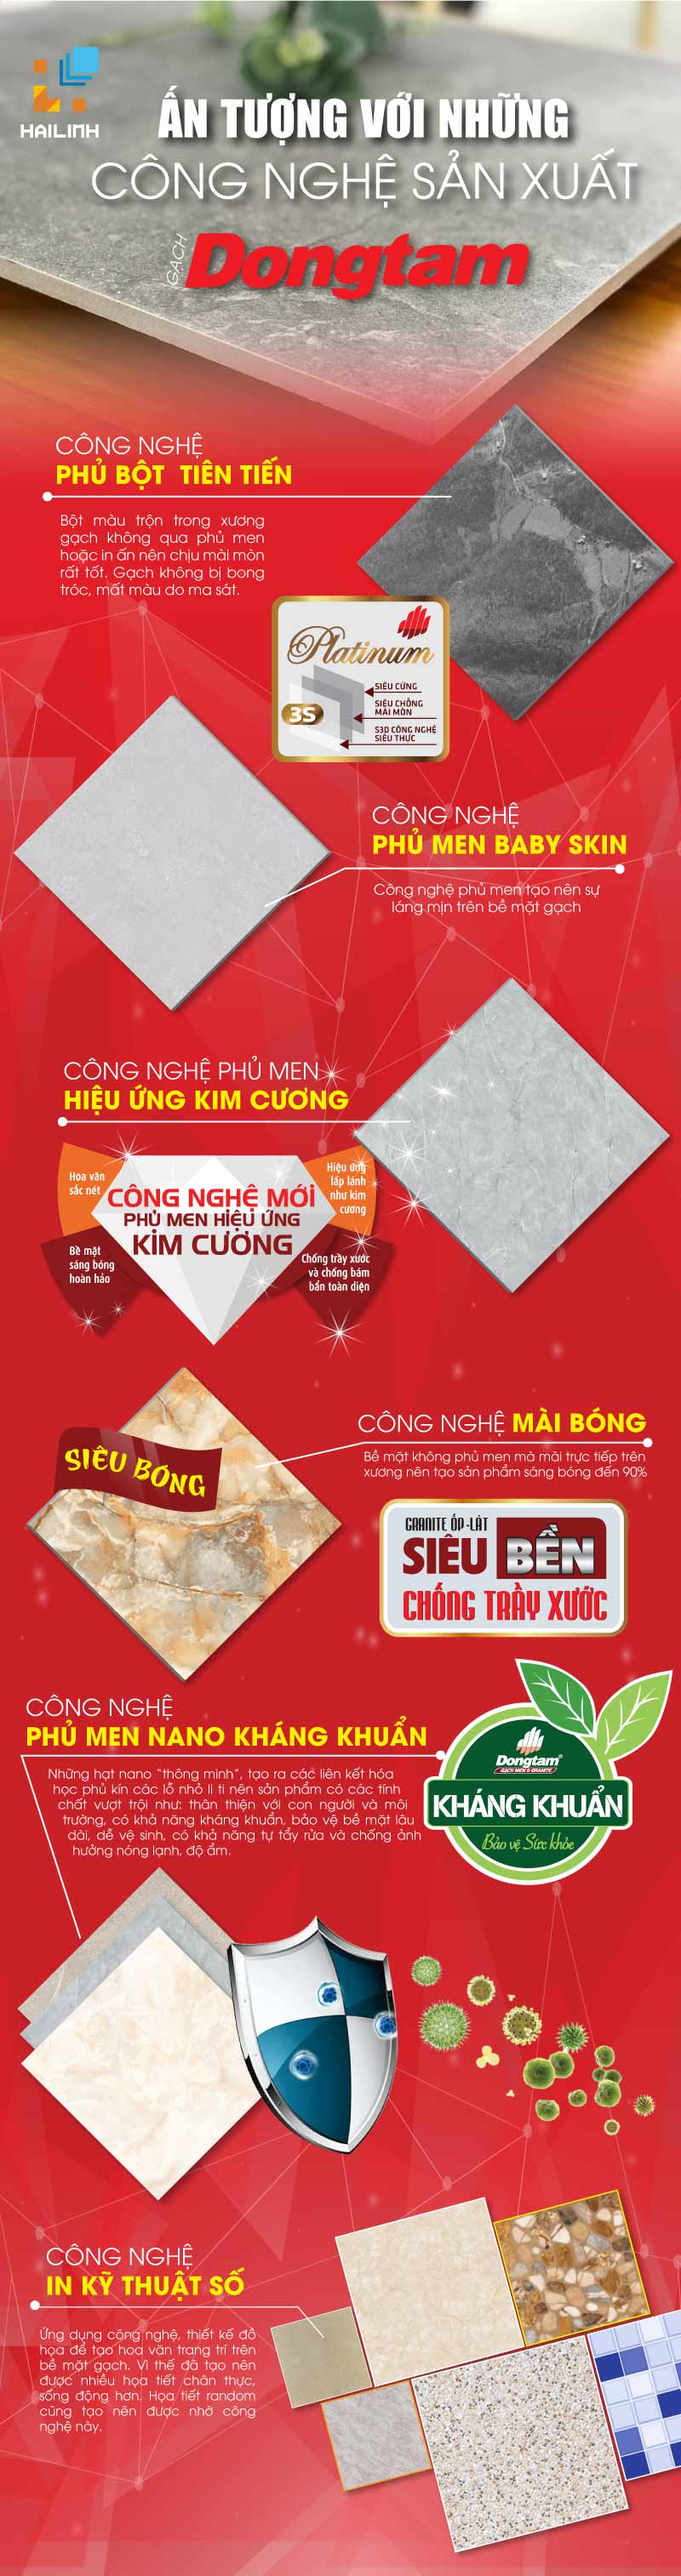 infographic dong tam